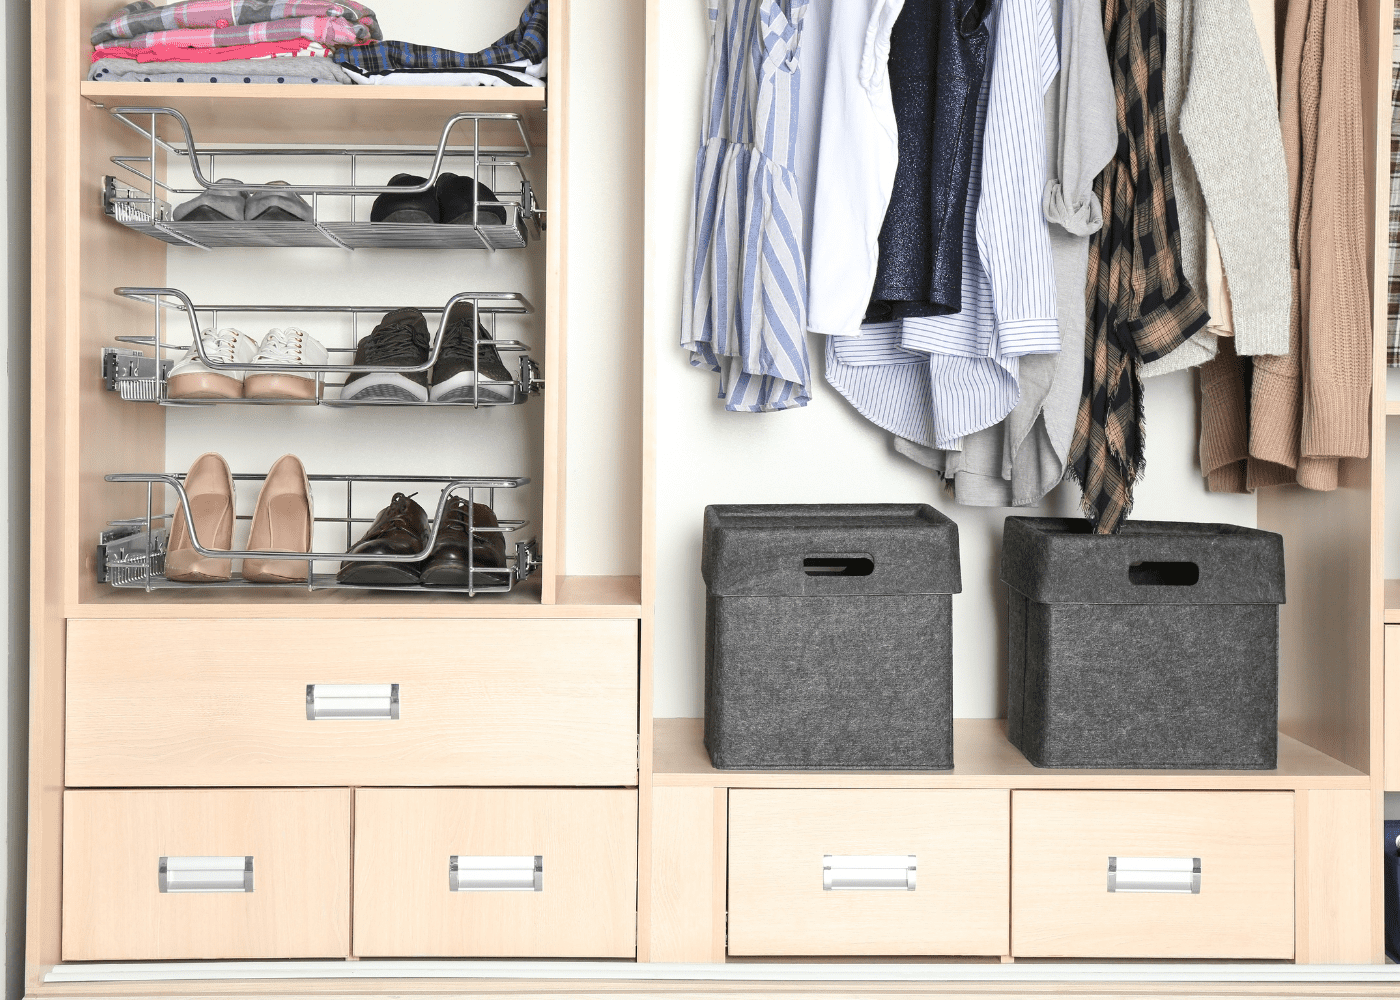 Shoe organizer and shelving for home storage in a closet.